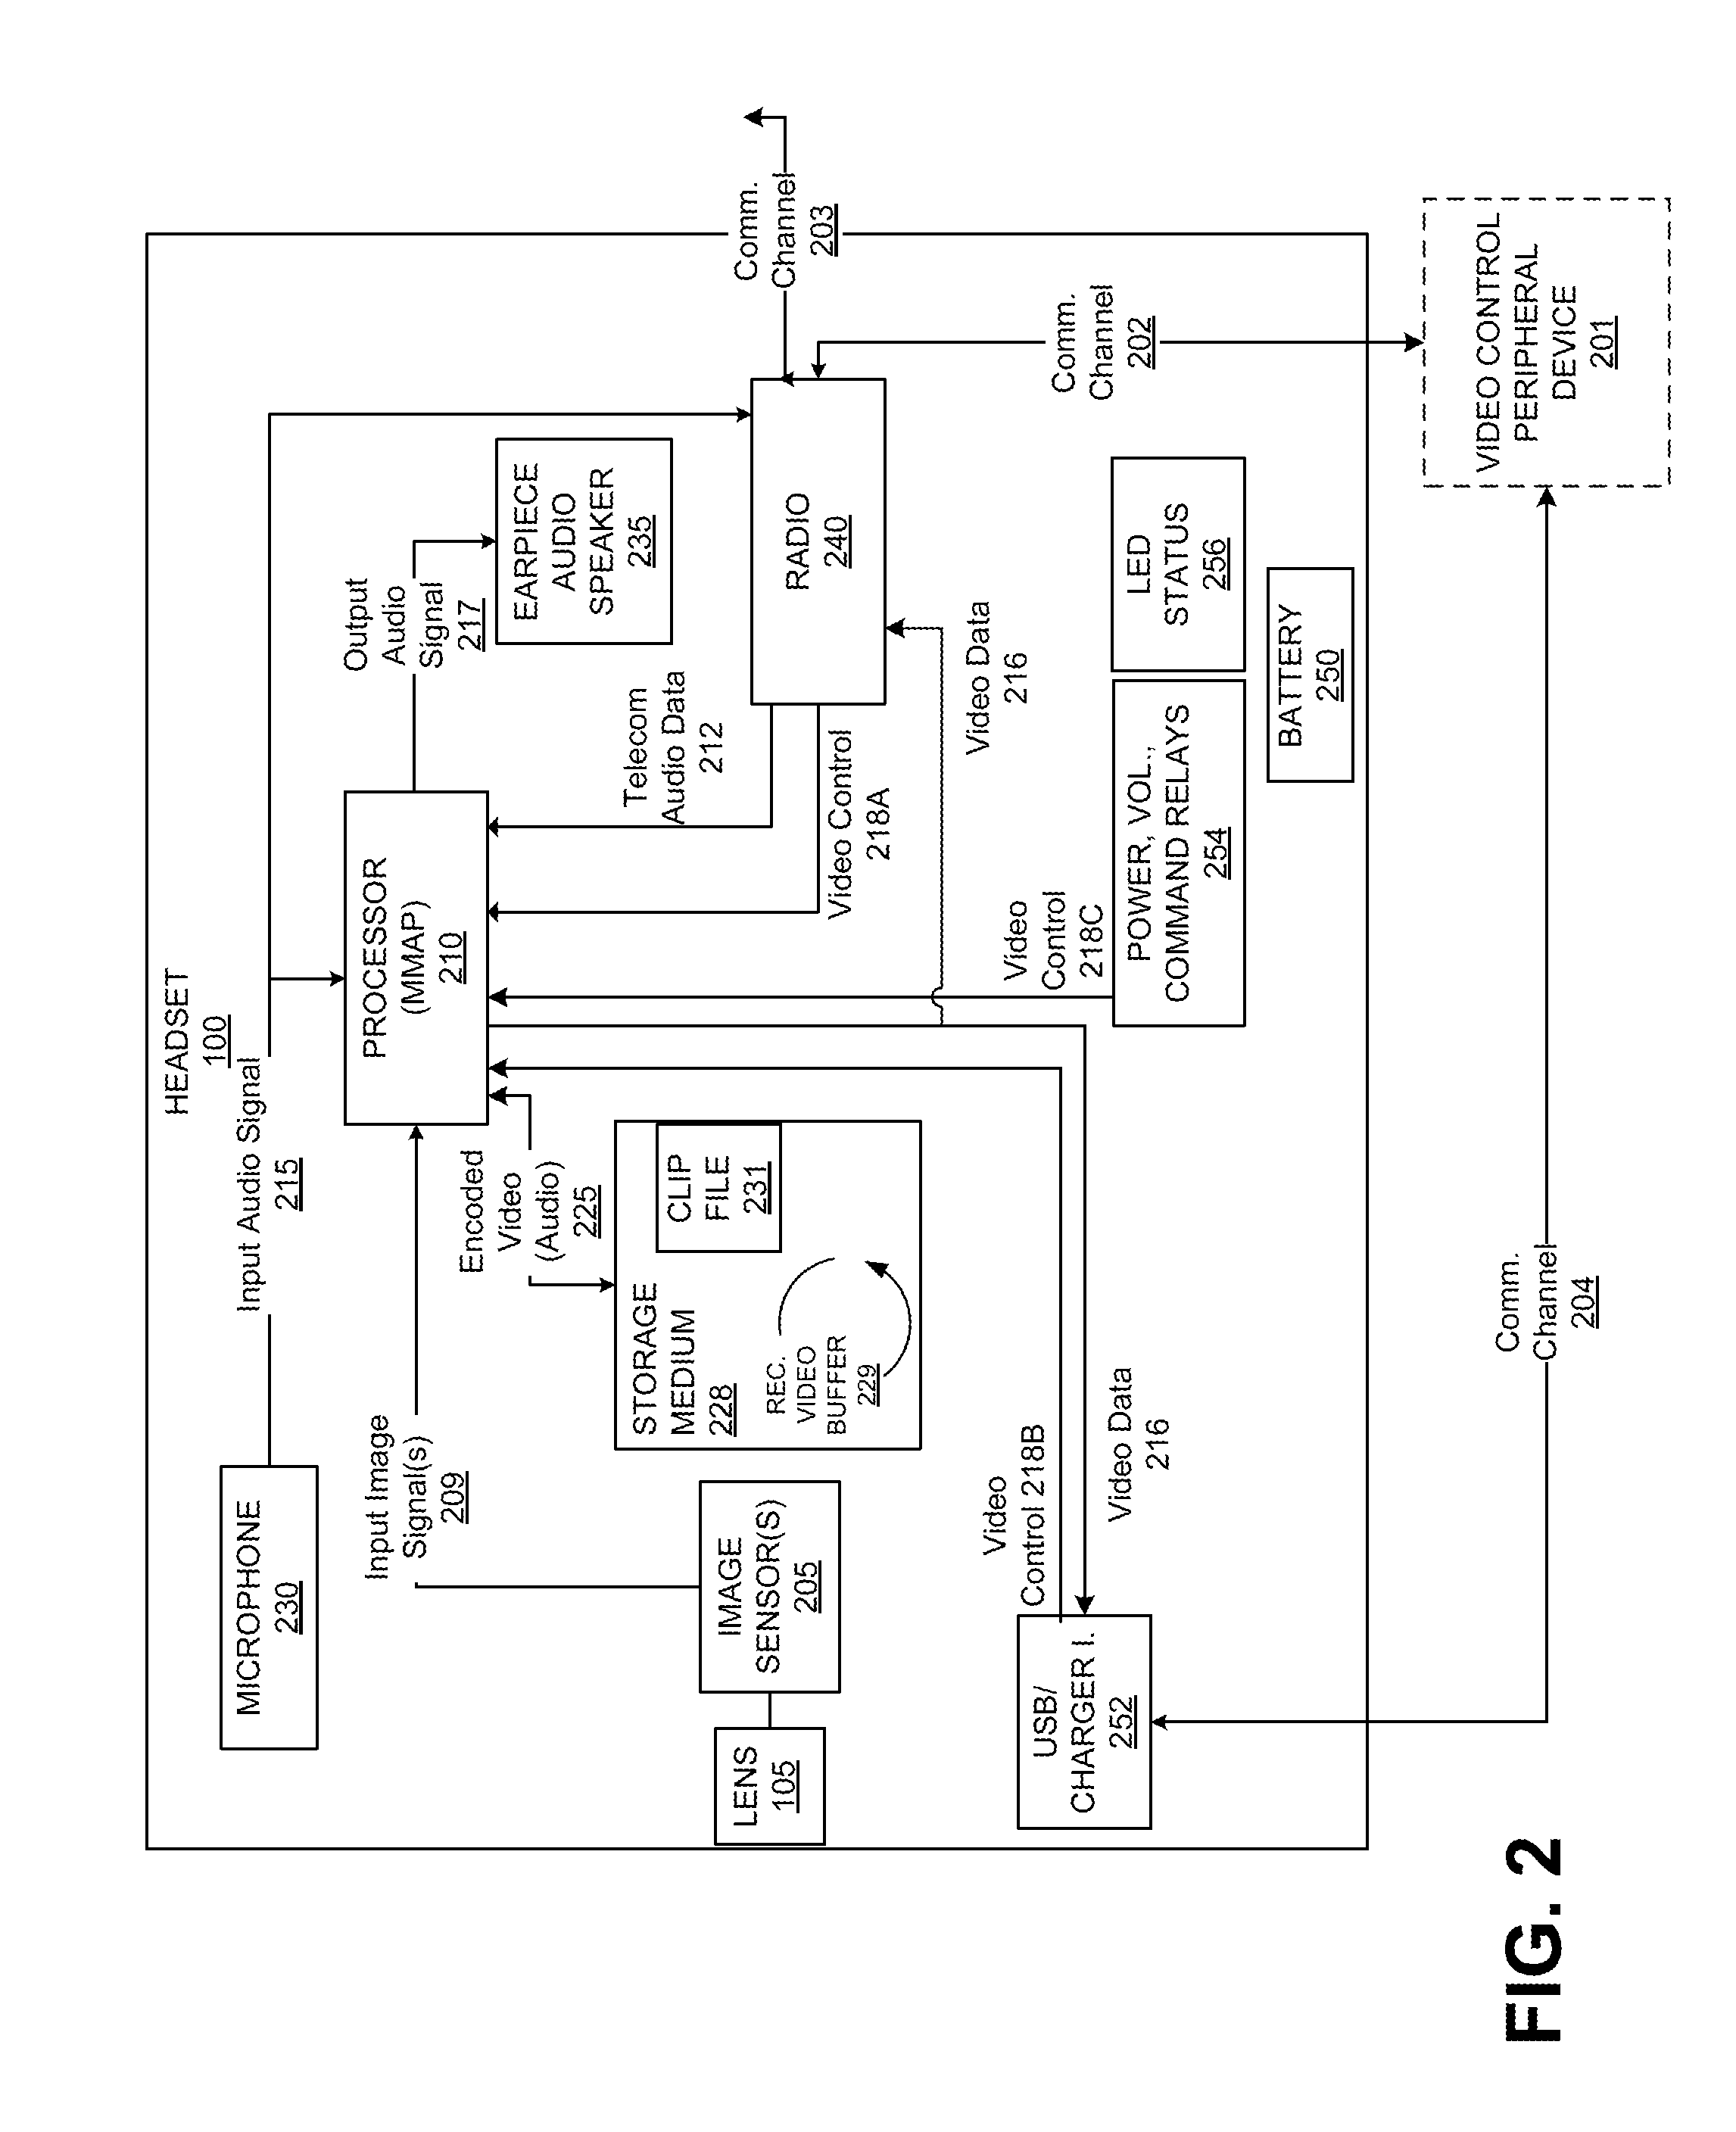 Creating and editing video recorded by a hands-free video recording device